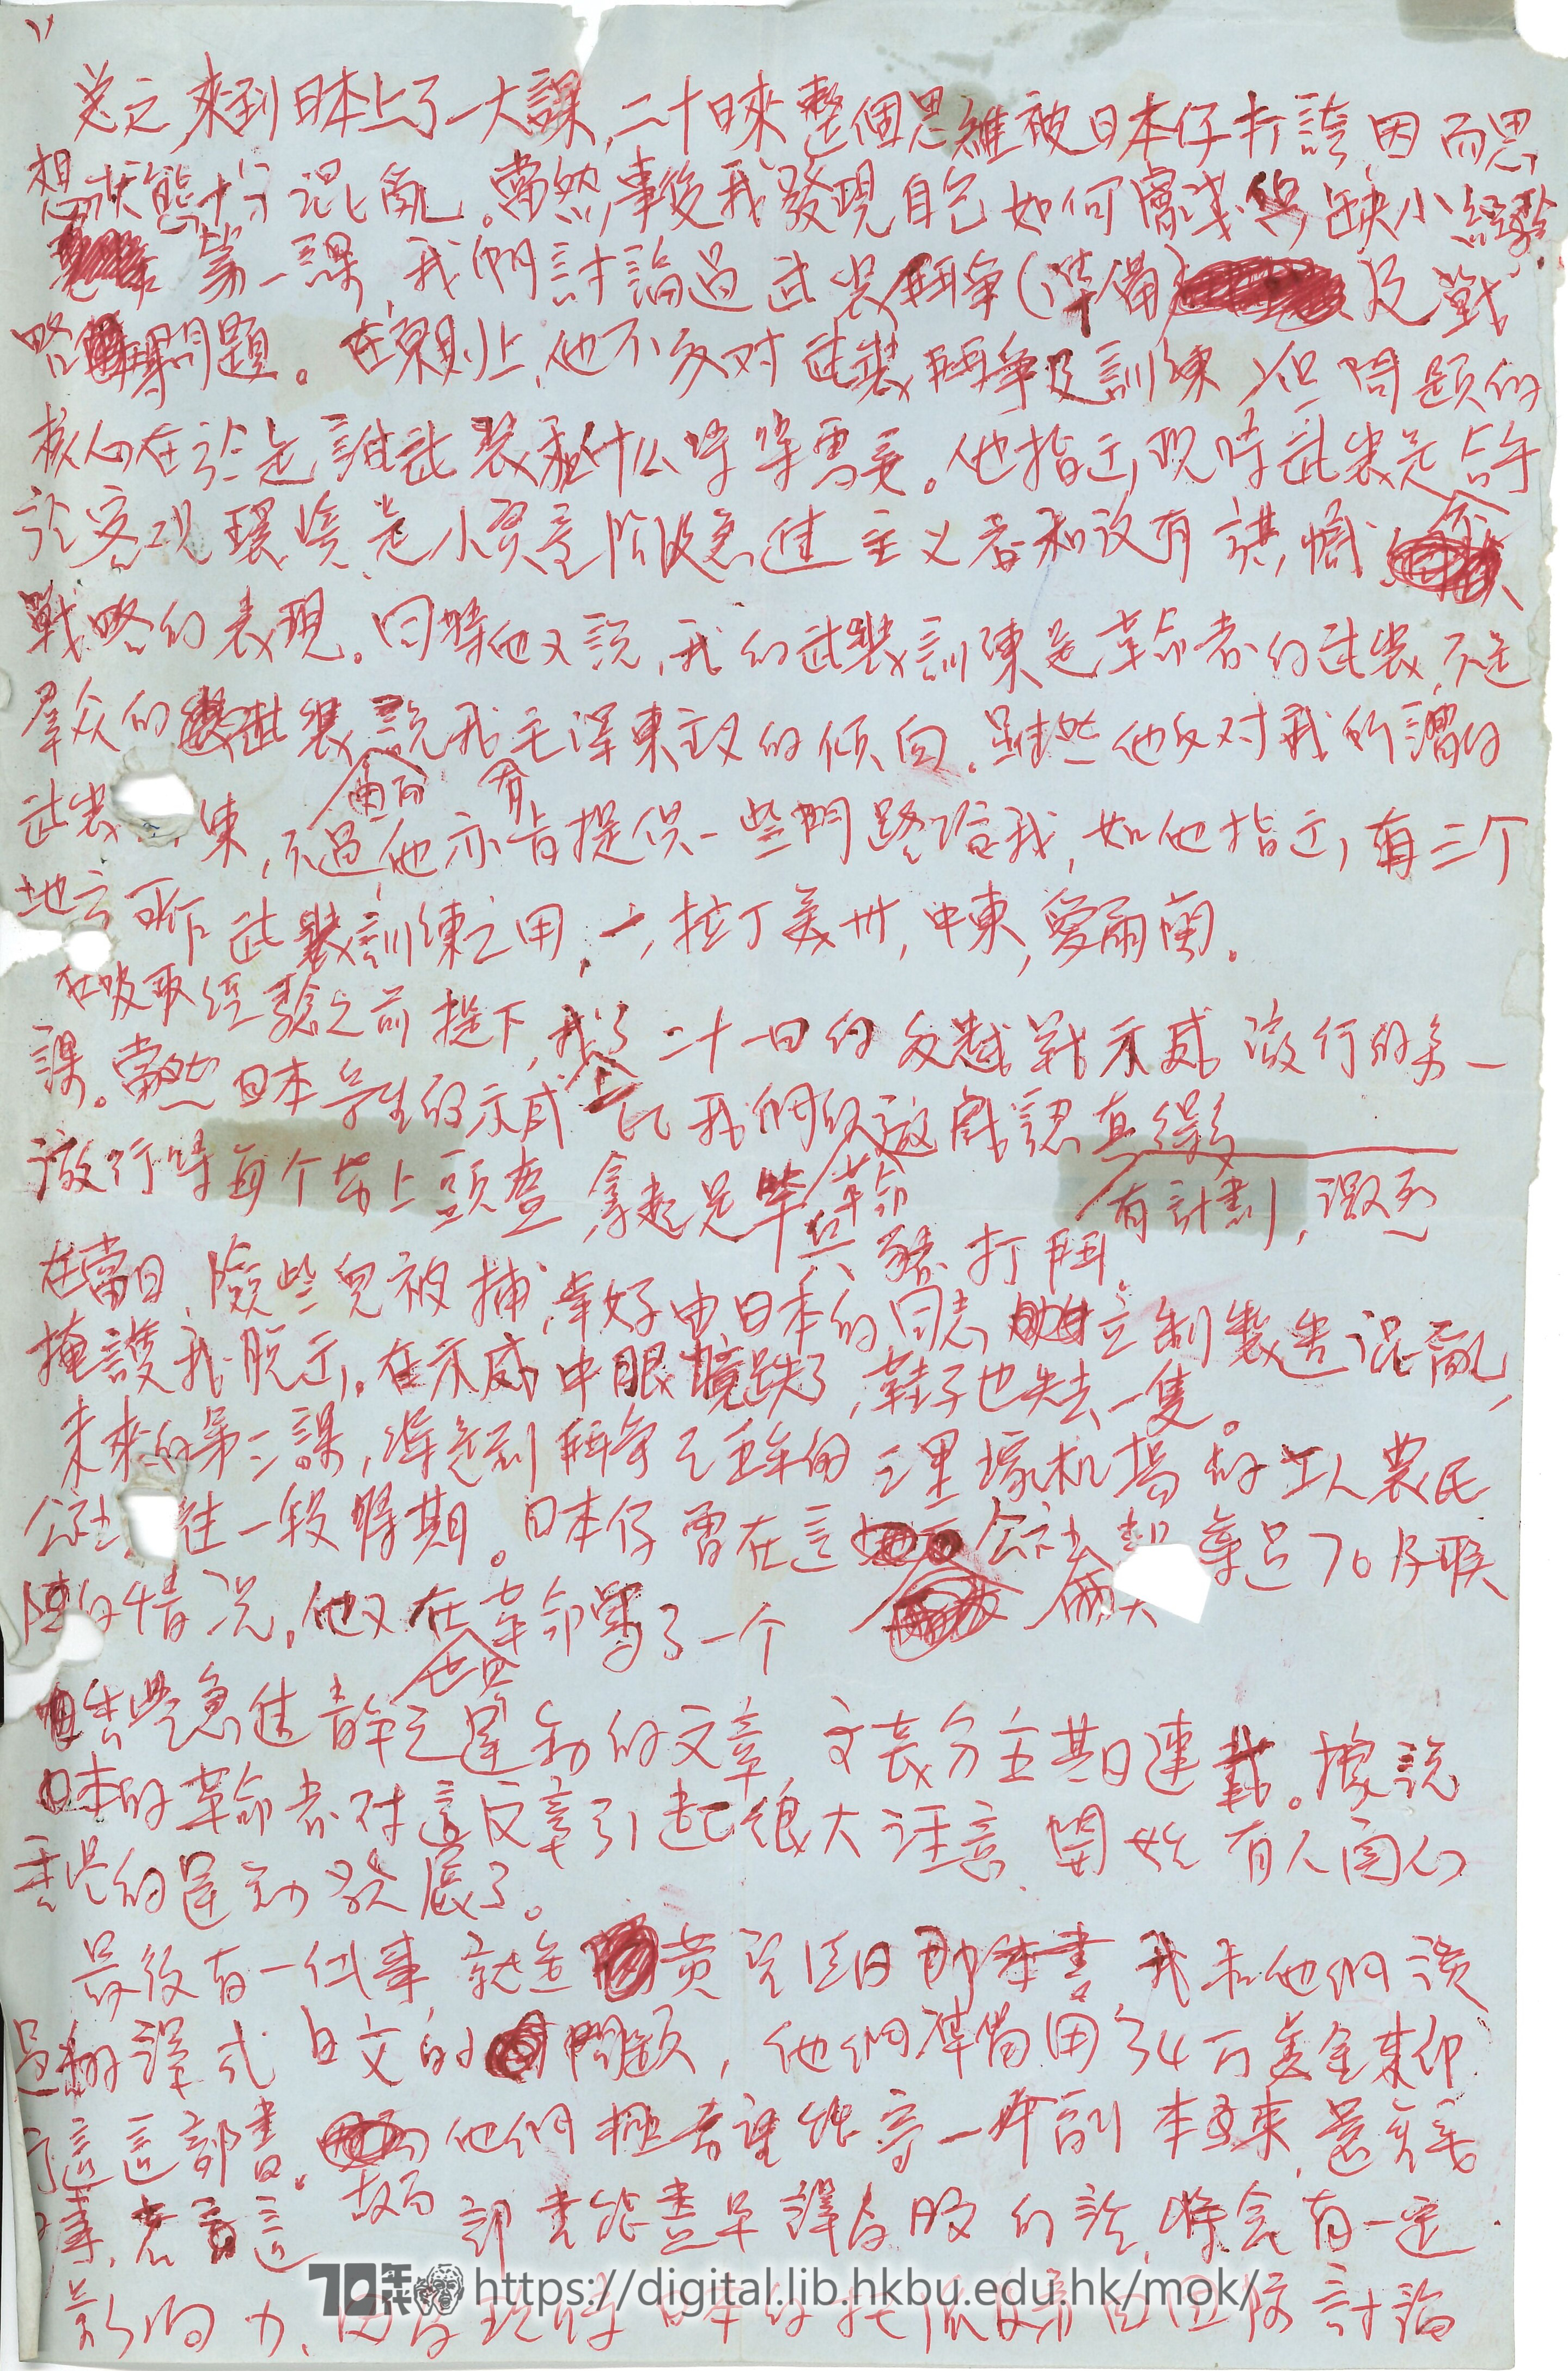   Letter from C.K. Leung to 70